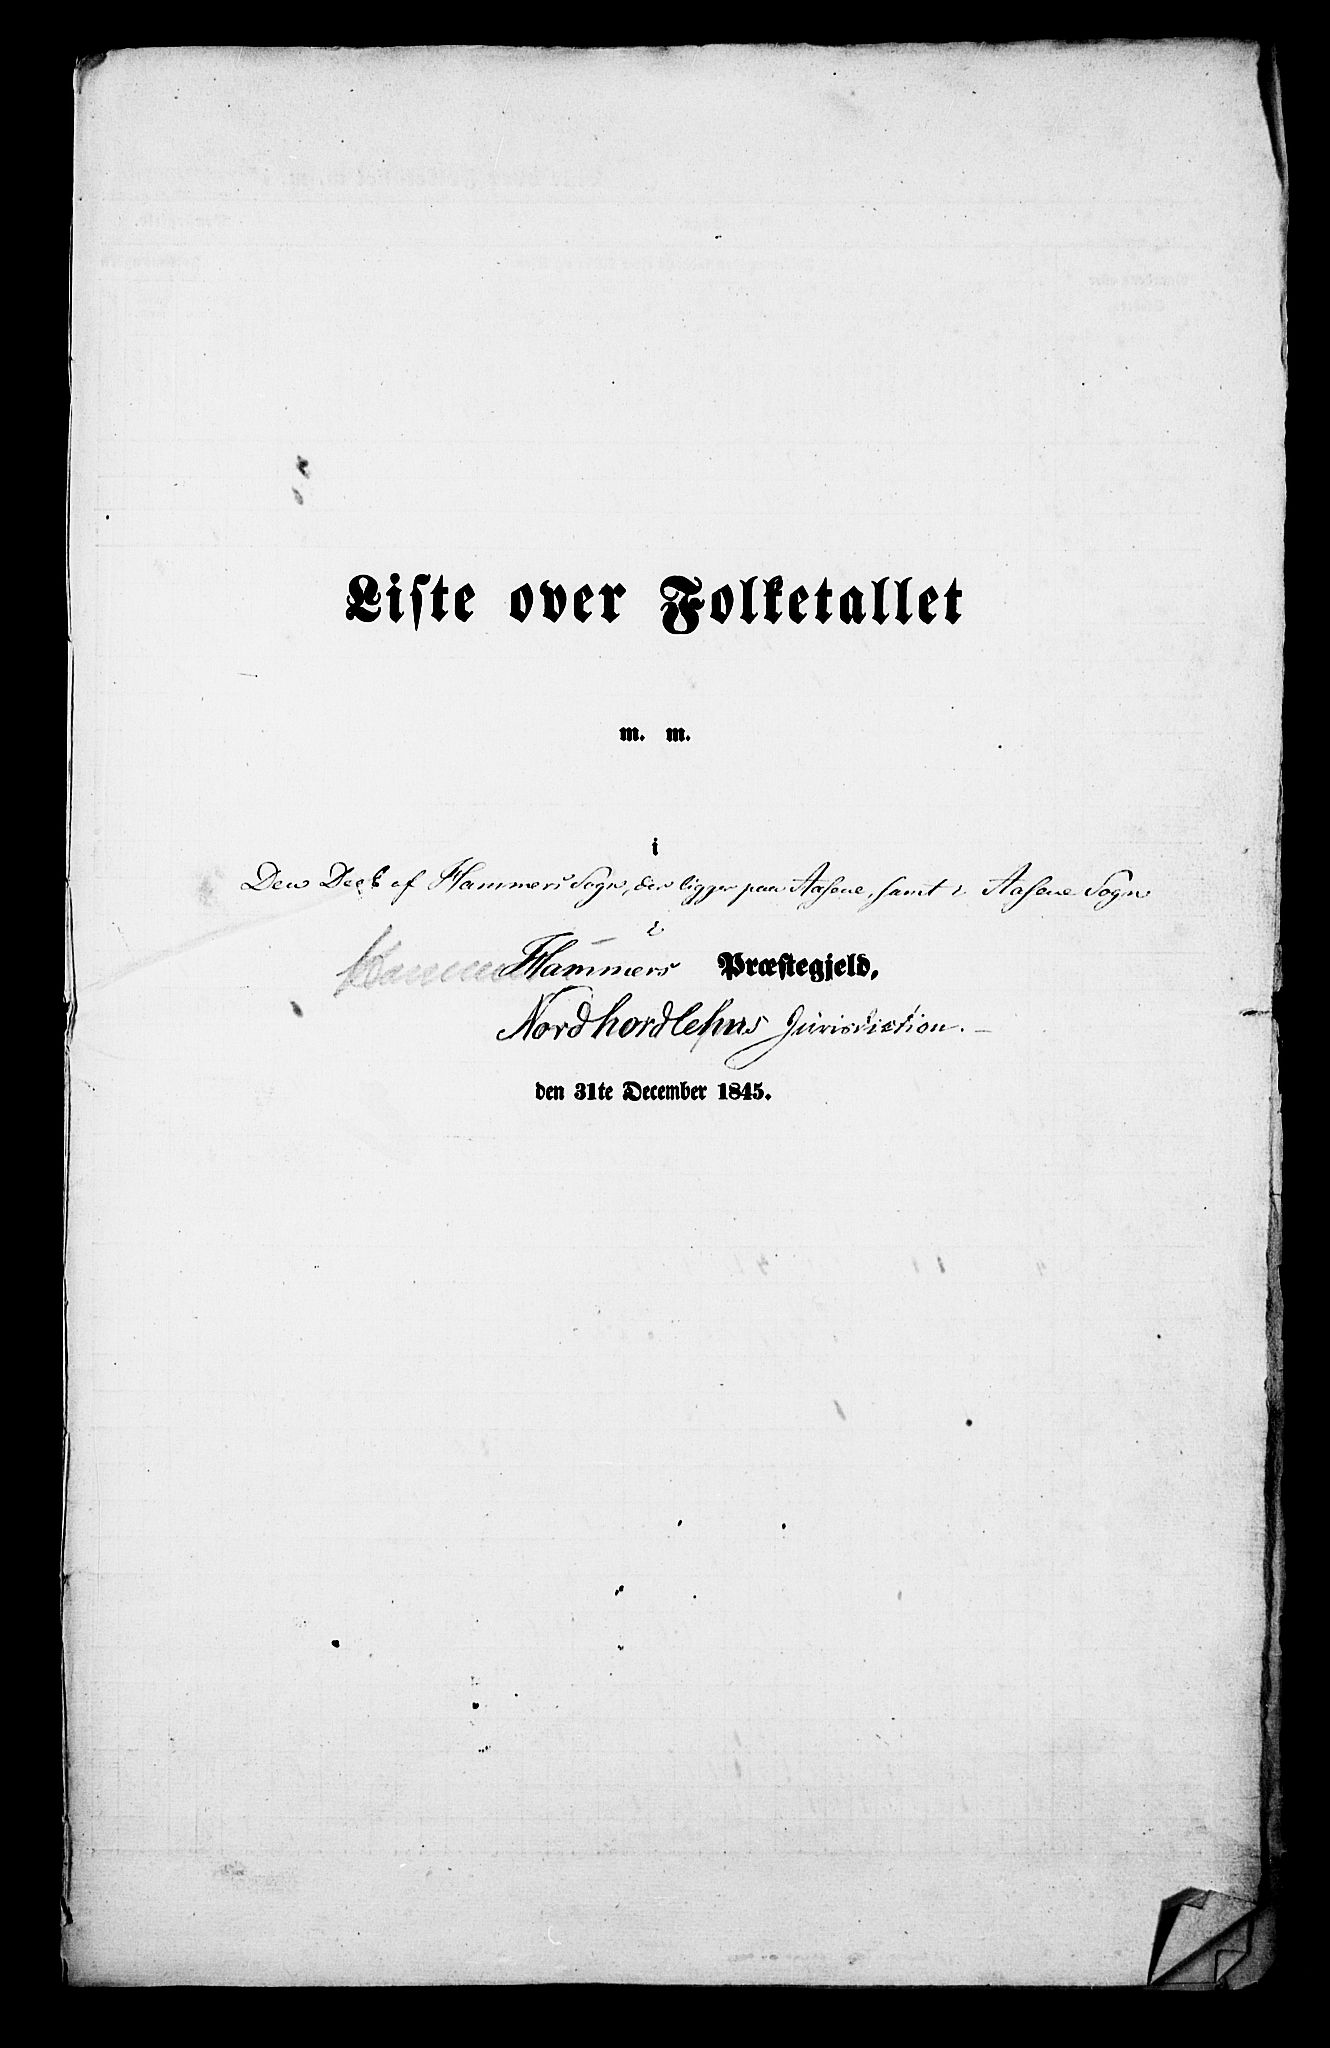 , Census 1845 for Hamre, 1845, p. 1